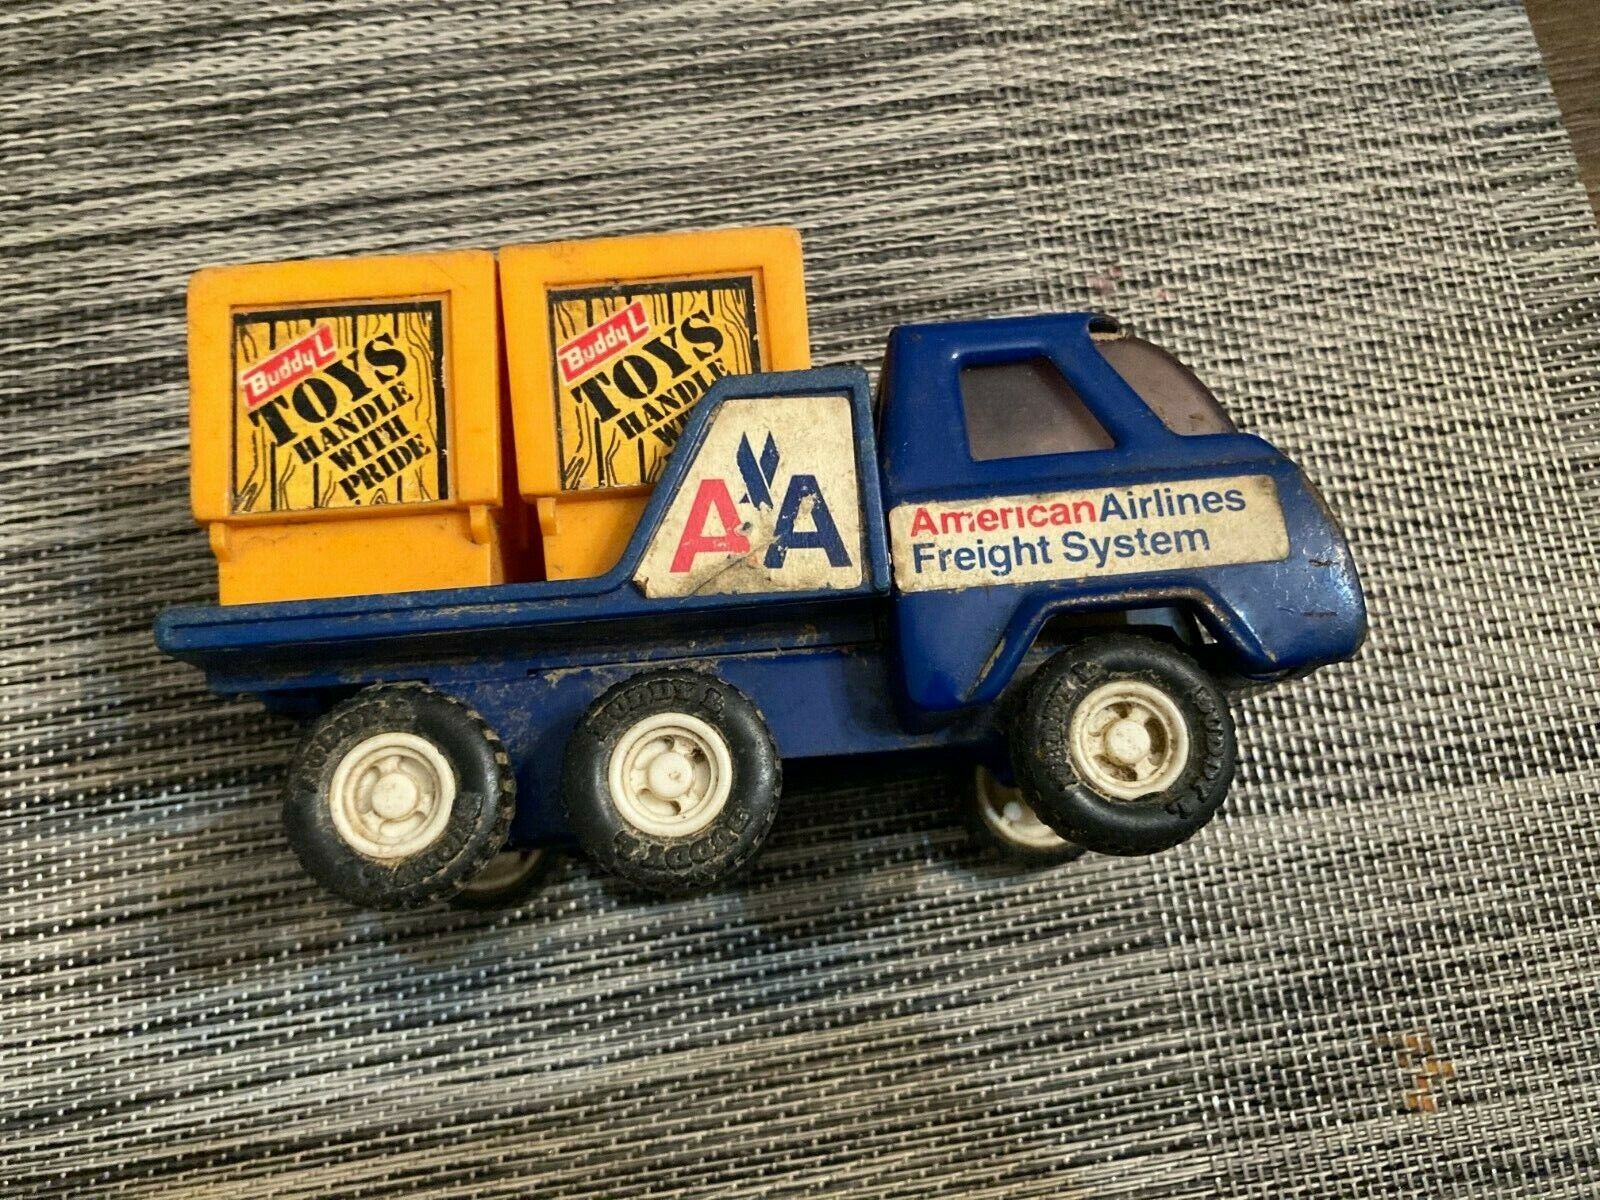 BUDDY L AMERICAN AIRLINES FREIGHT SYSTEM TRUCK w/ FREIGHT BOXES Vintage